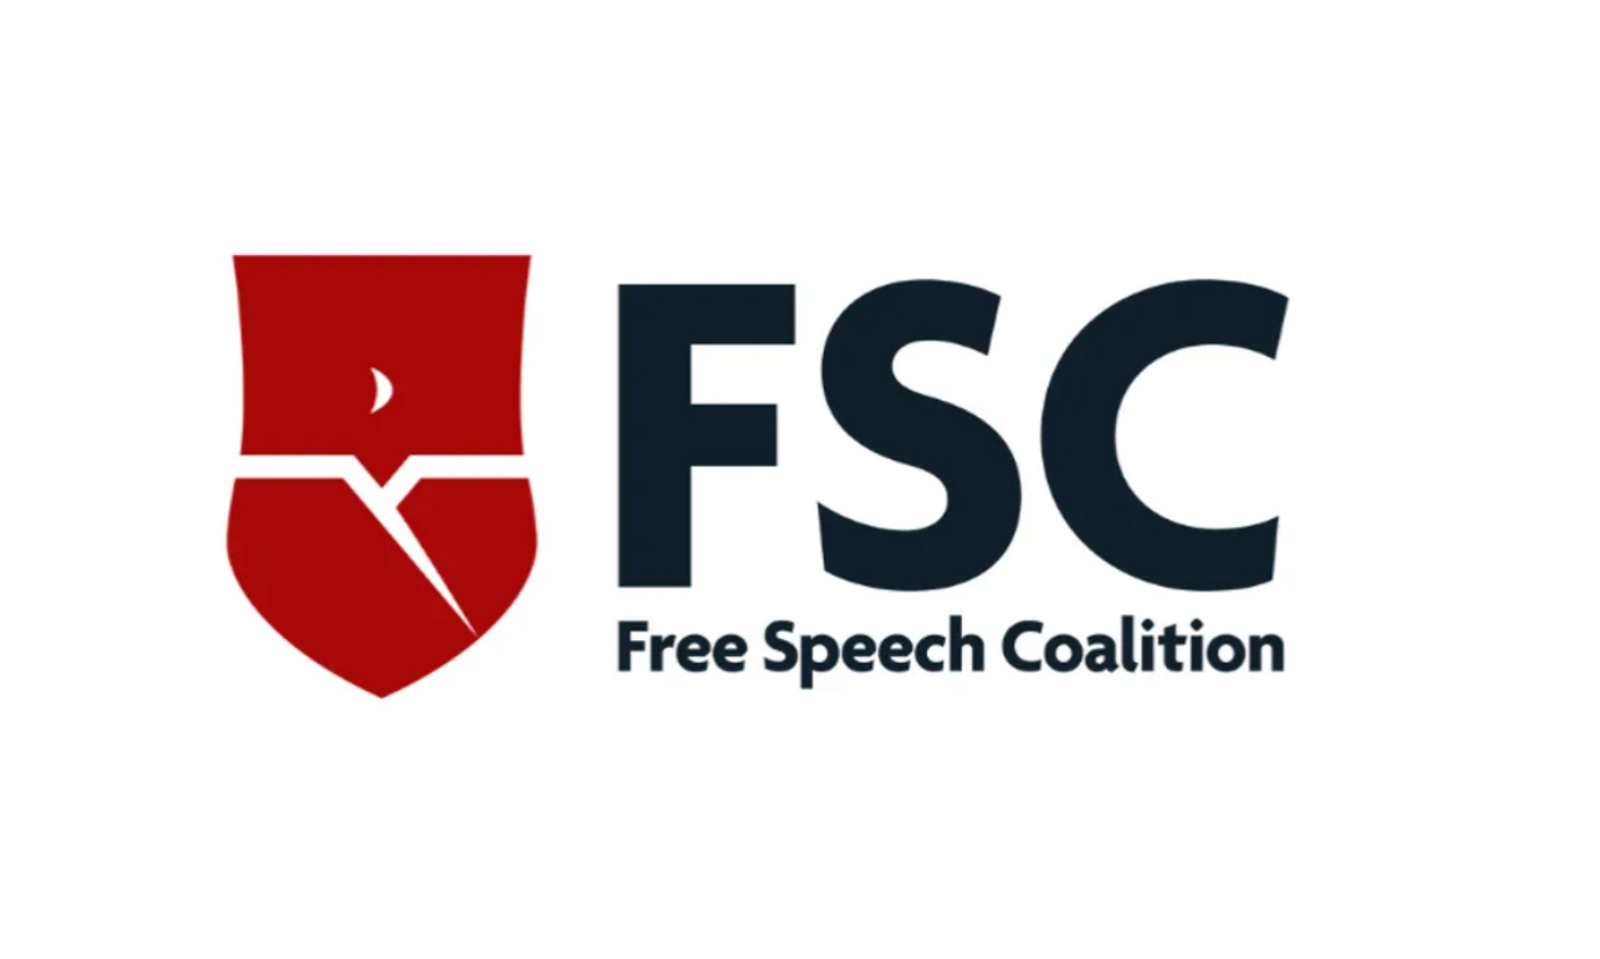 FSC to Open Nominations for Board of Directors Sunday